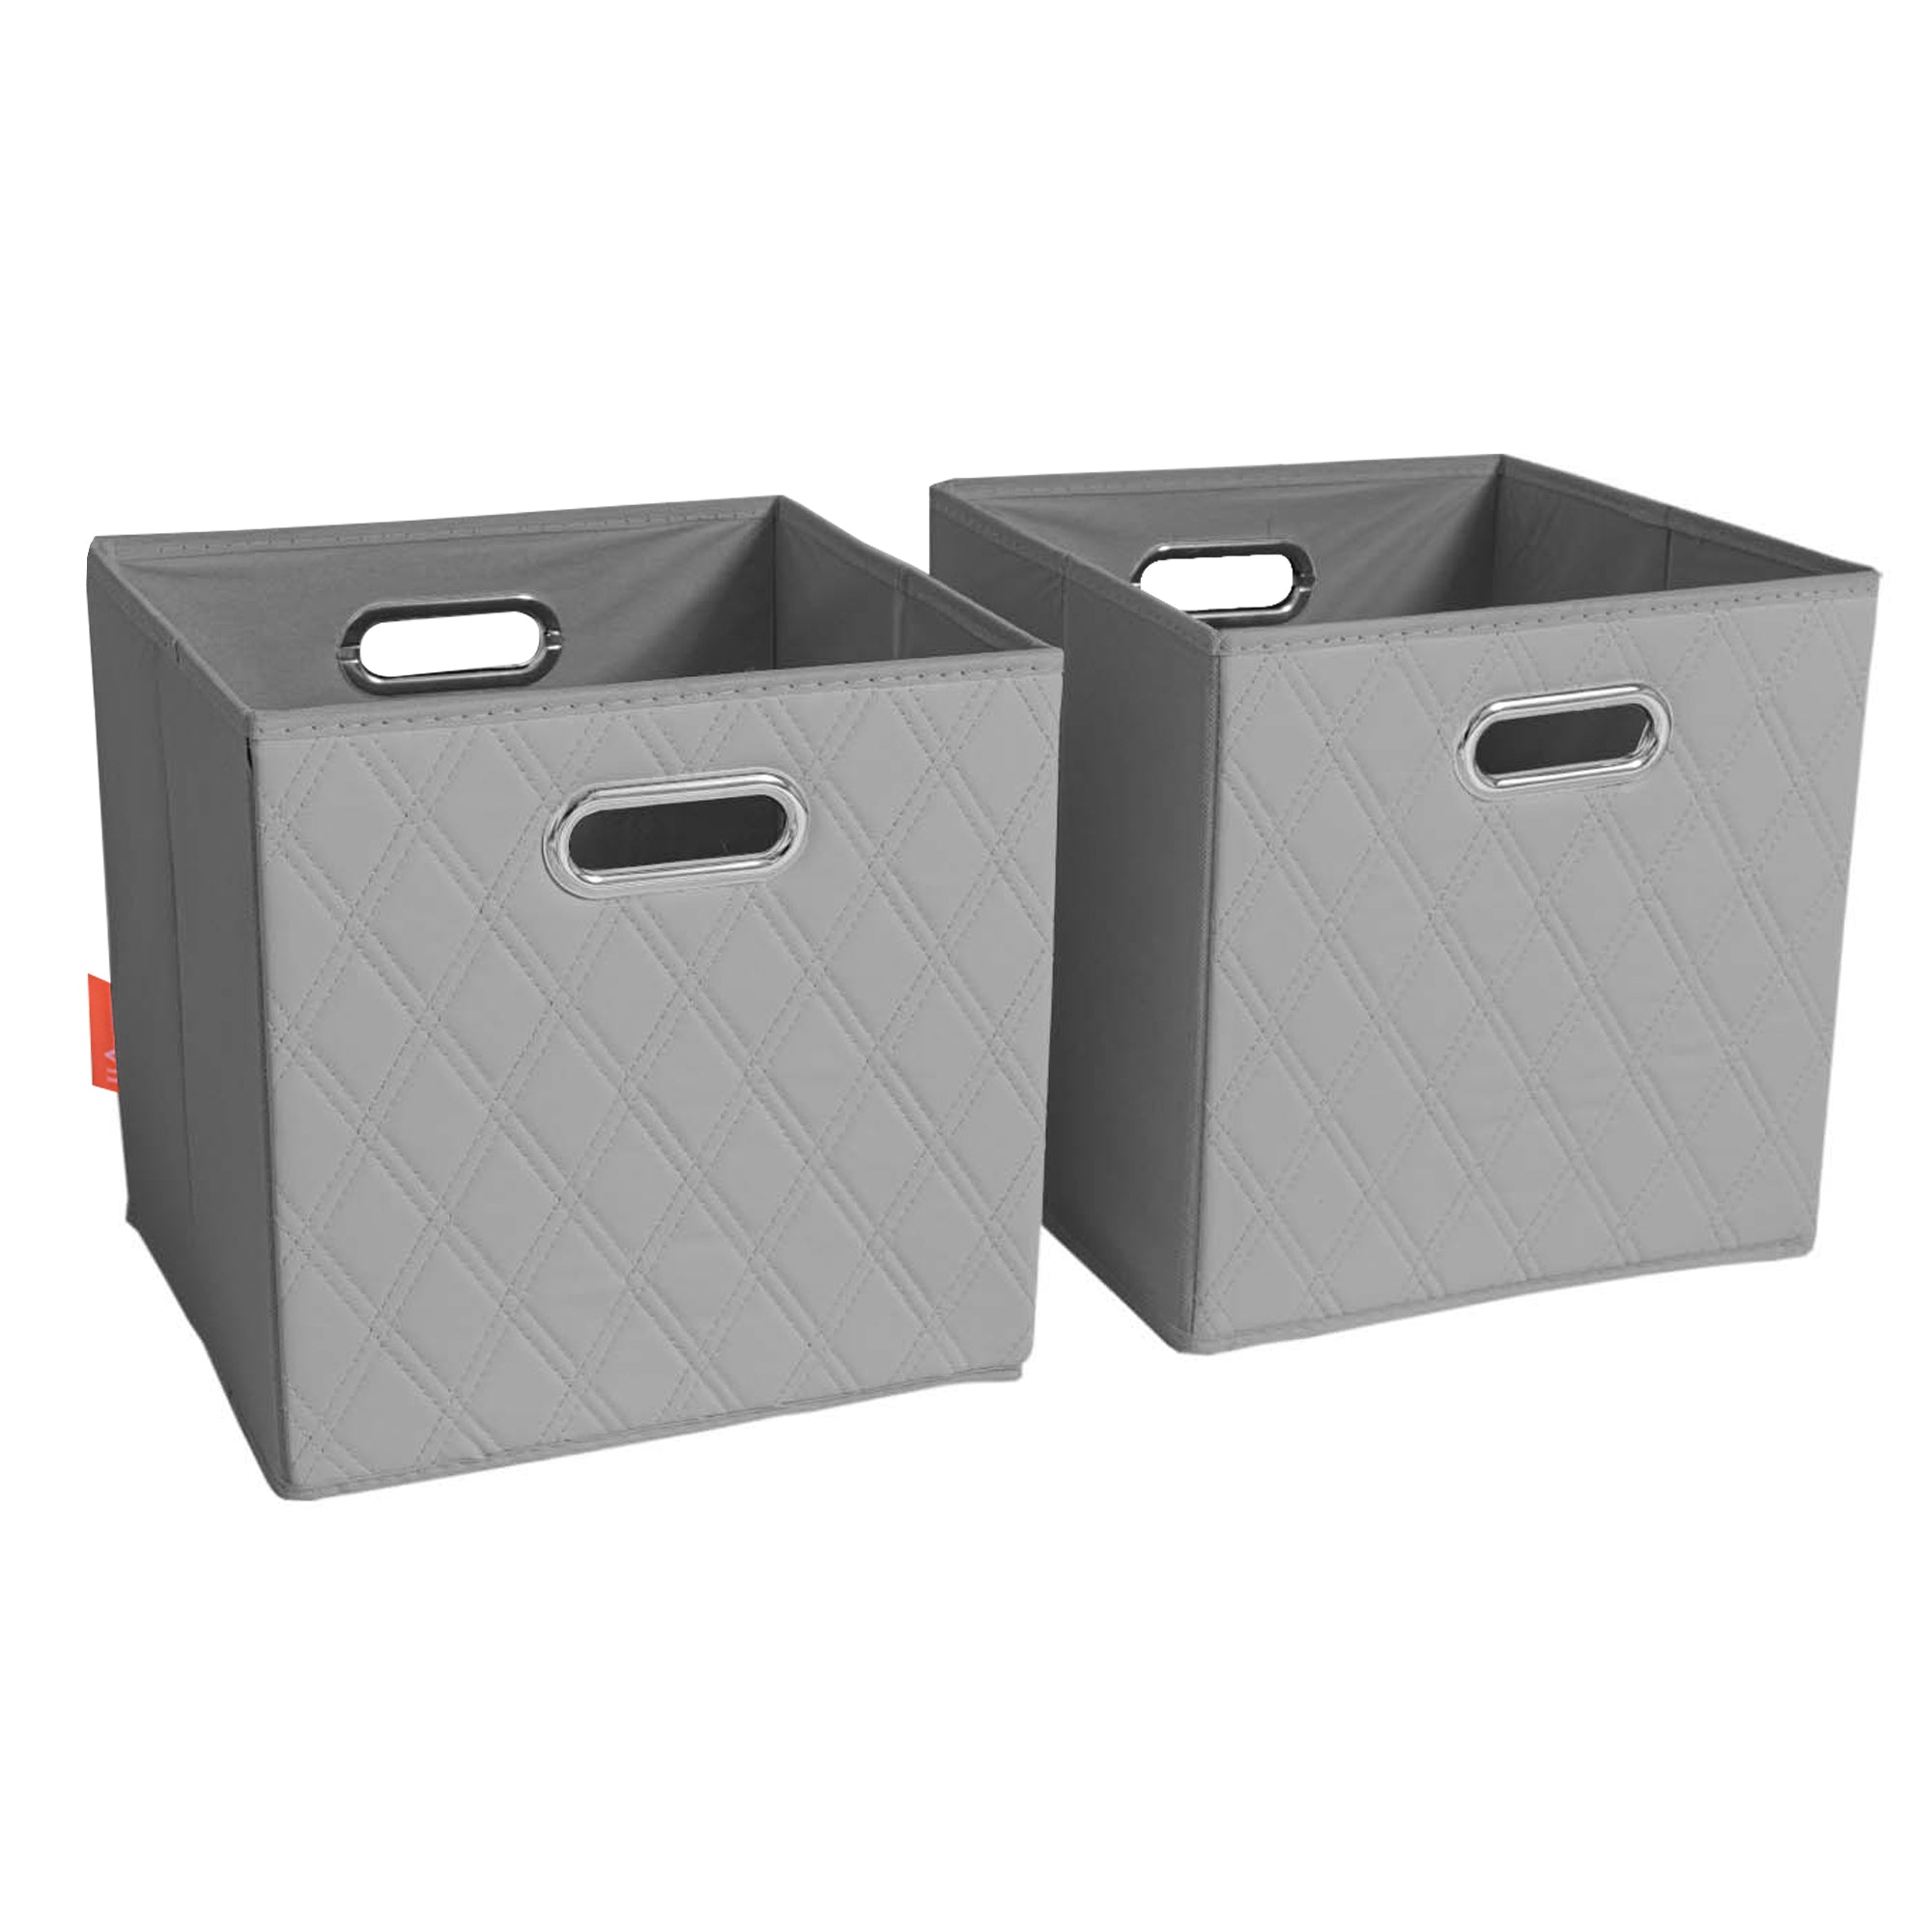 JIAessentials 13 inch Foldable Diamond Patterned Faux Leather Storage Cube Bins Set of Two with Dual Handles - 13" Gray